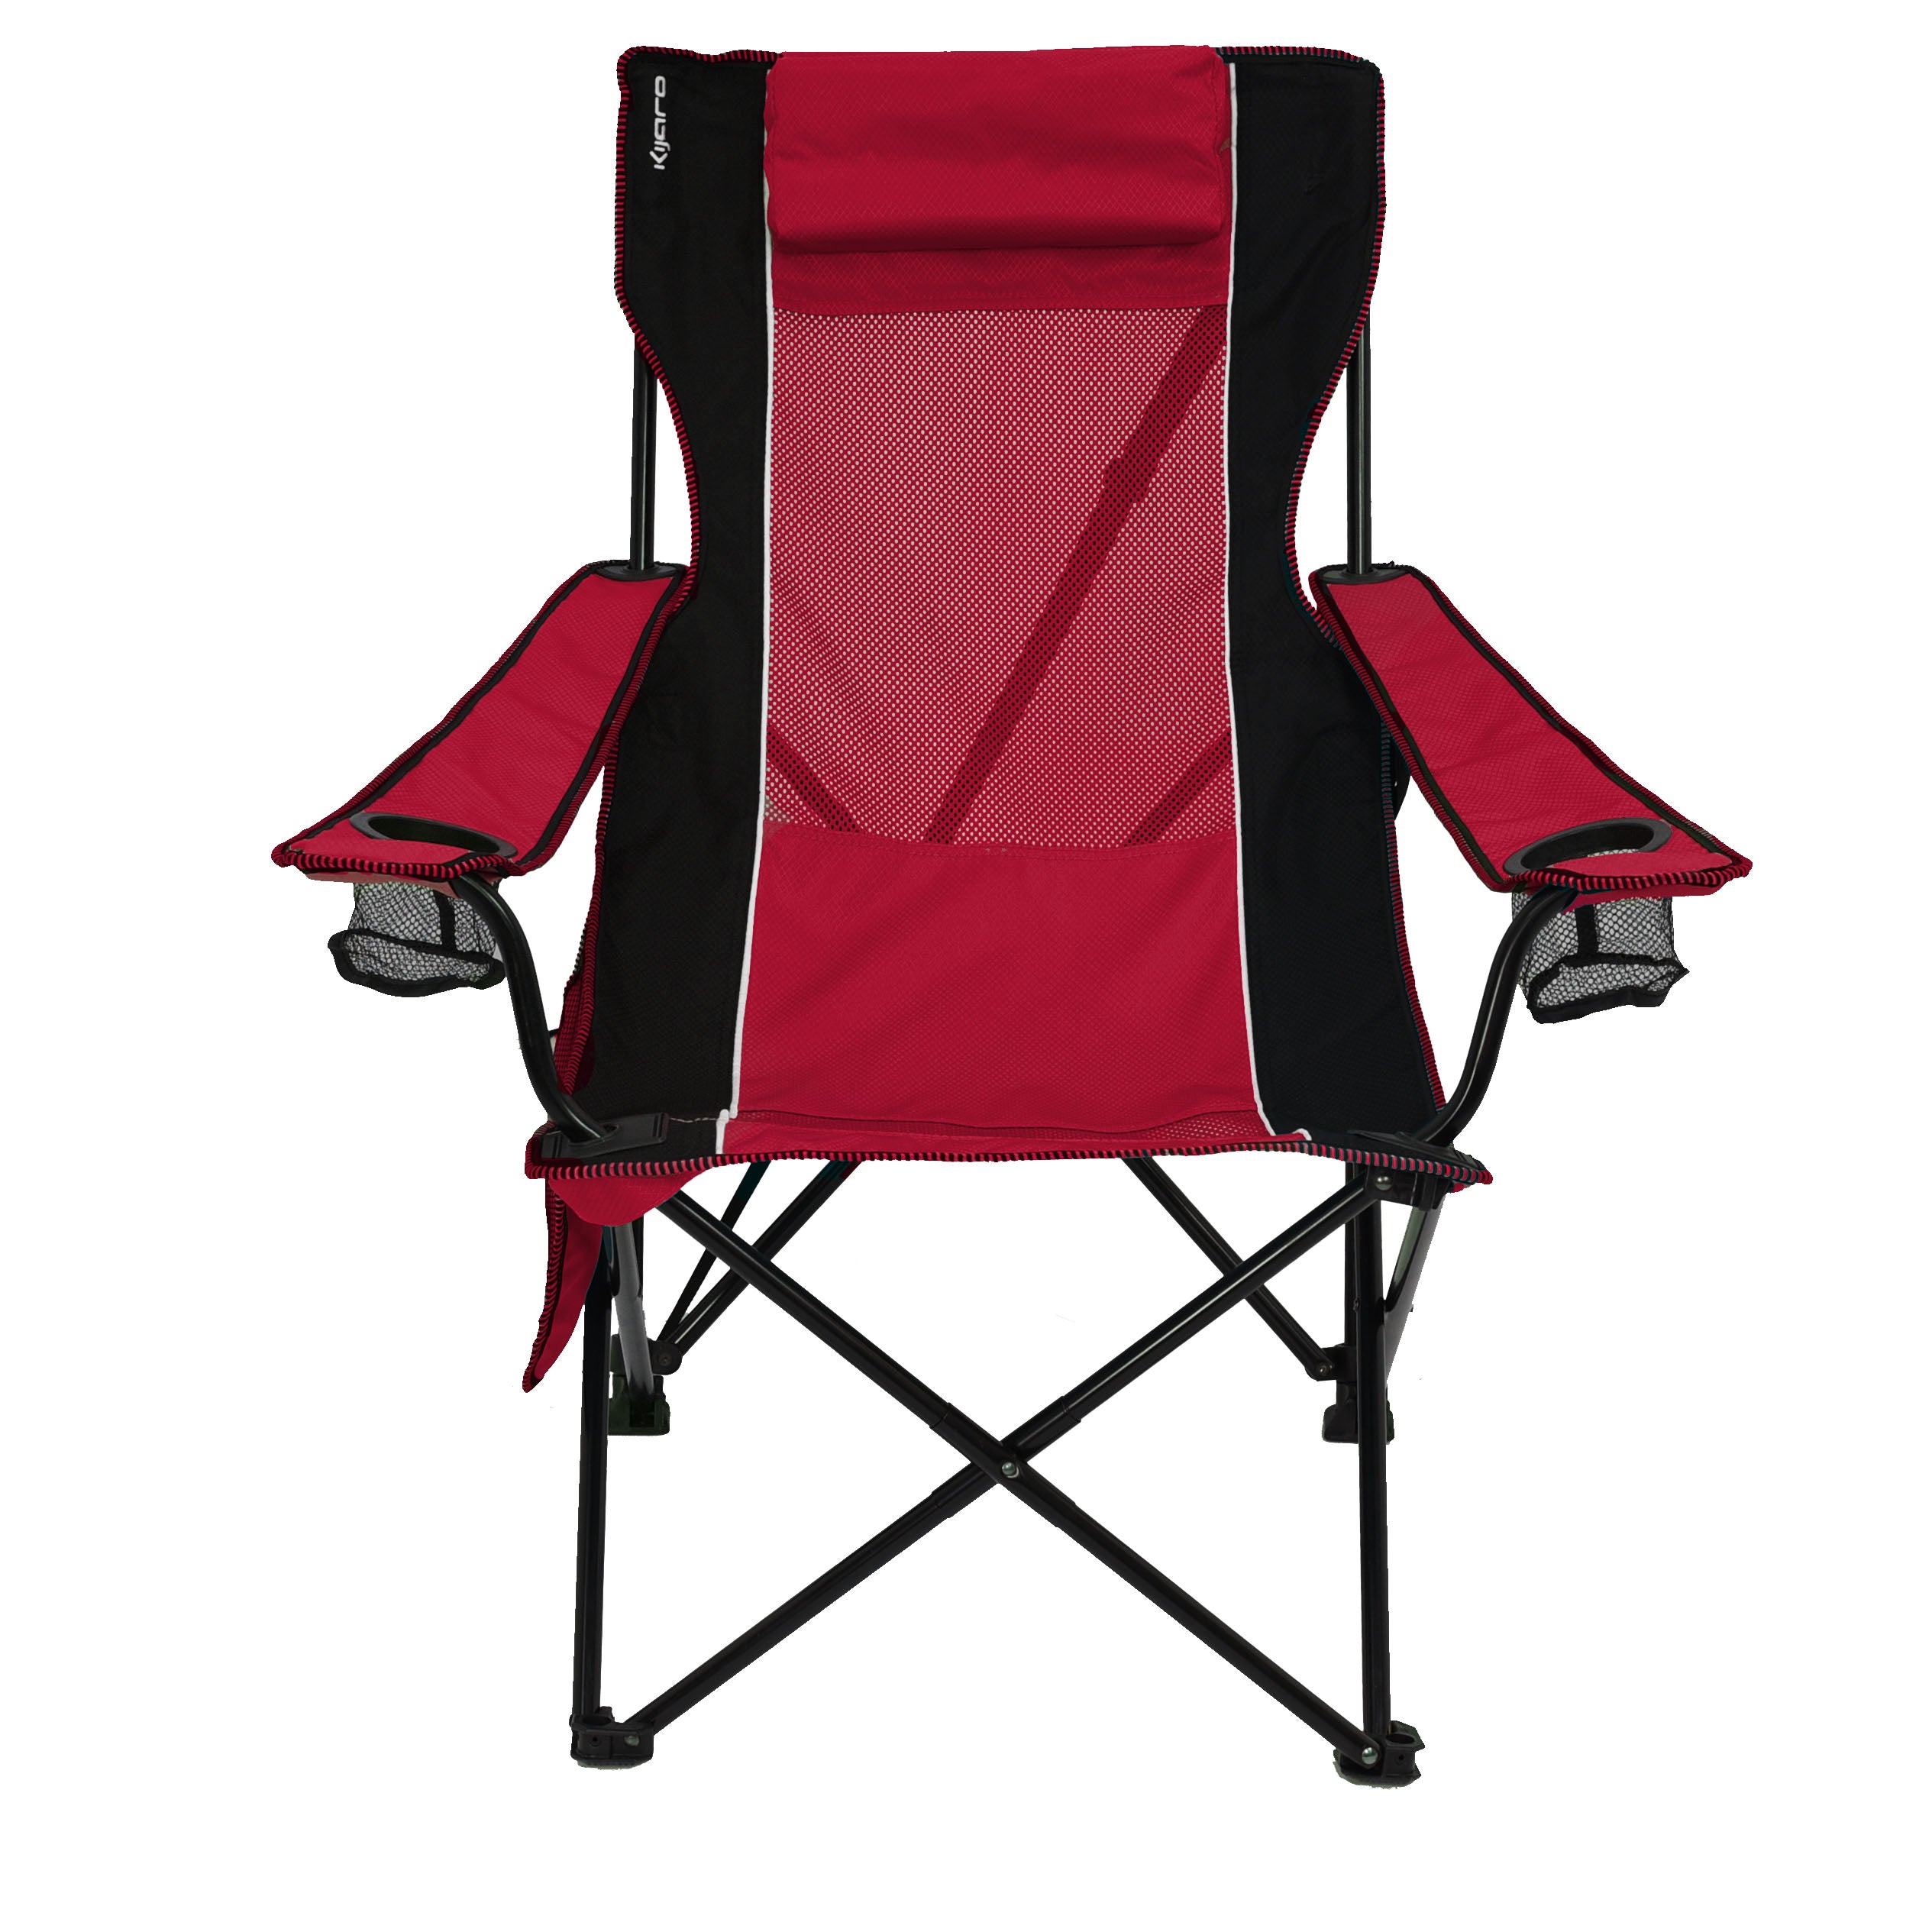 Sling Chair - 300 lb Weight Capacity